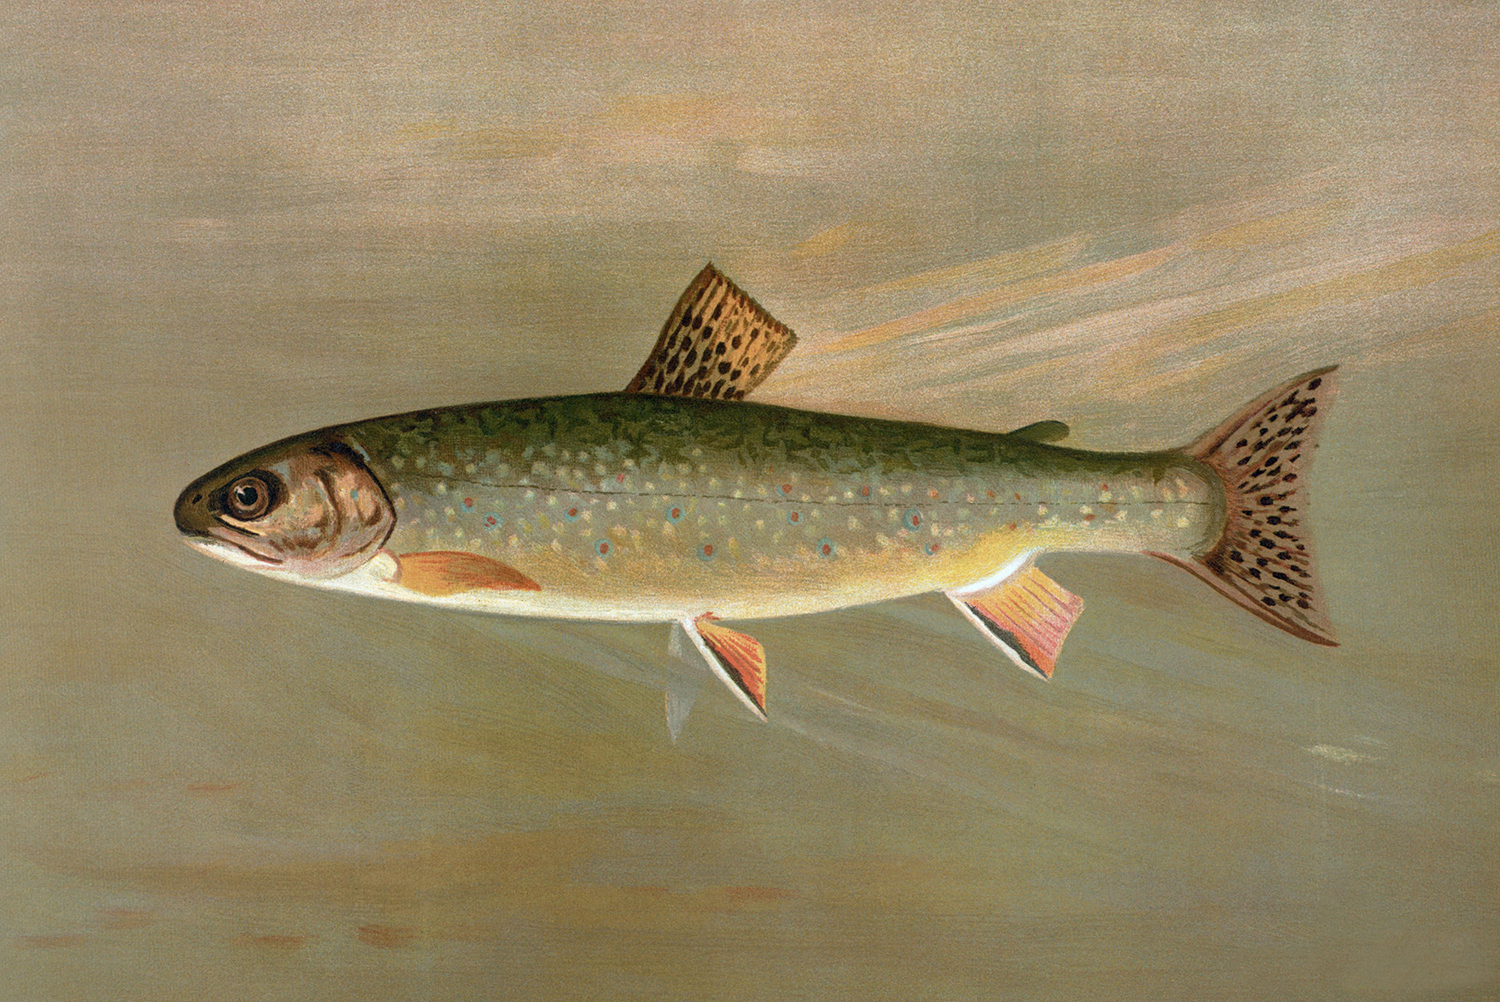 Cabin/Lodge Lodge American Brook Trout Reproduction Print, Framed Behind Glass